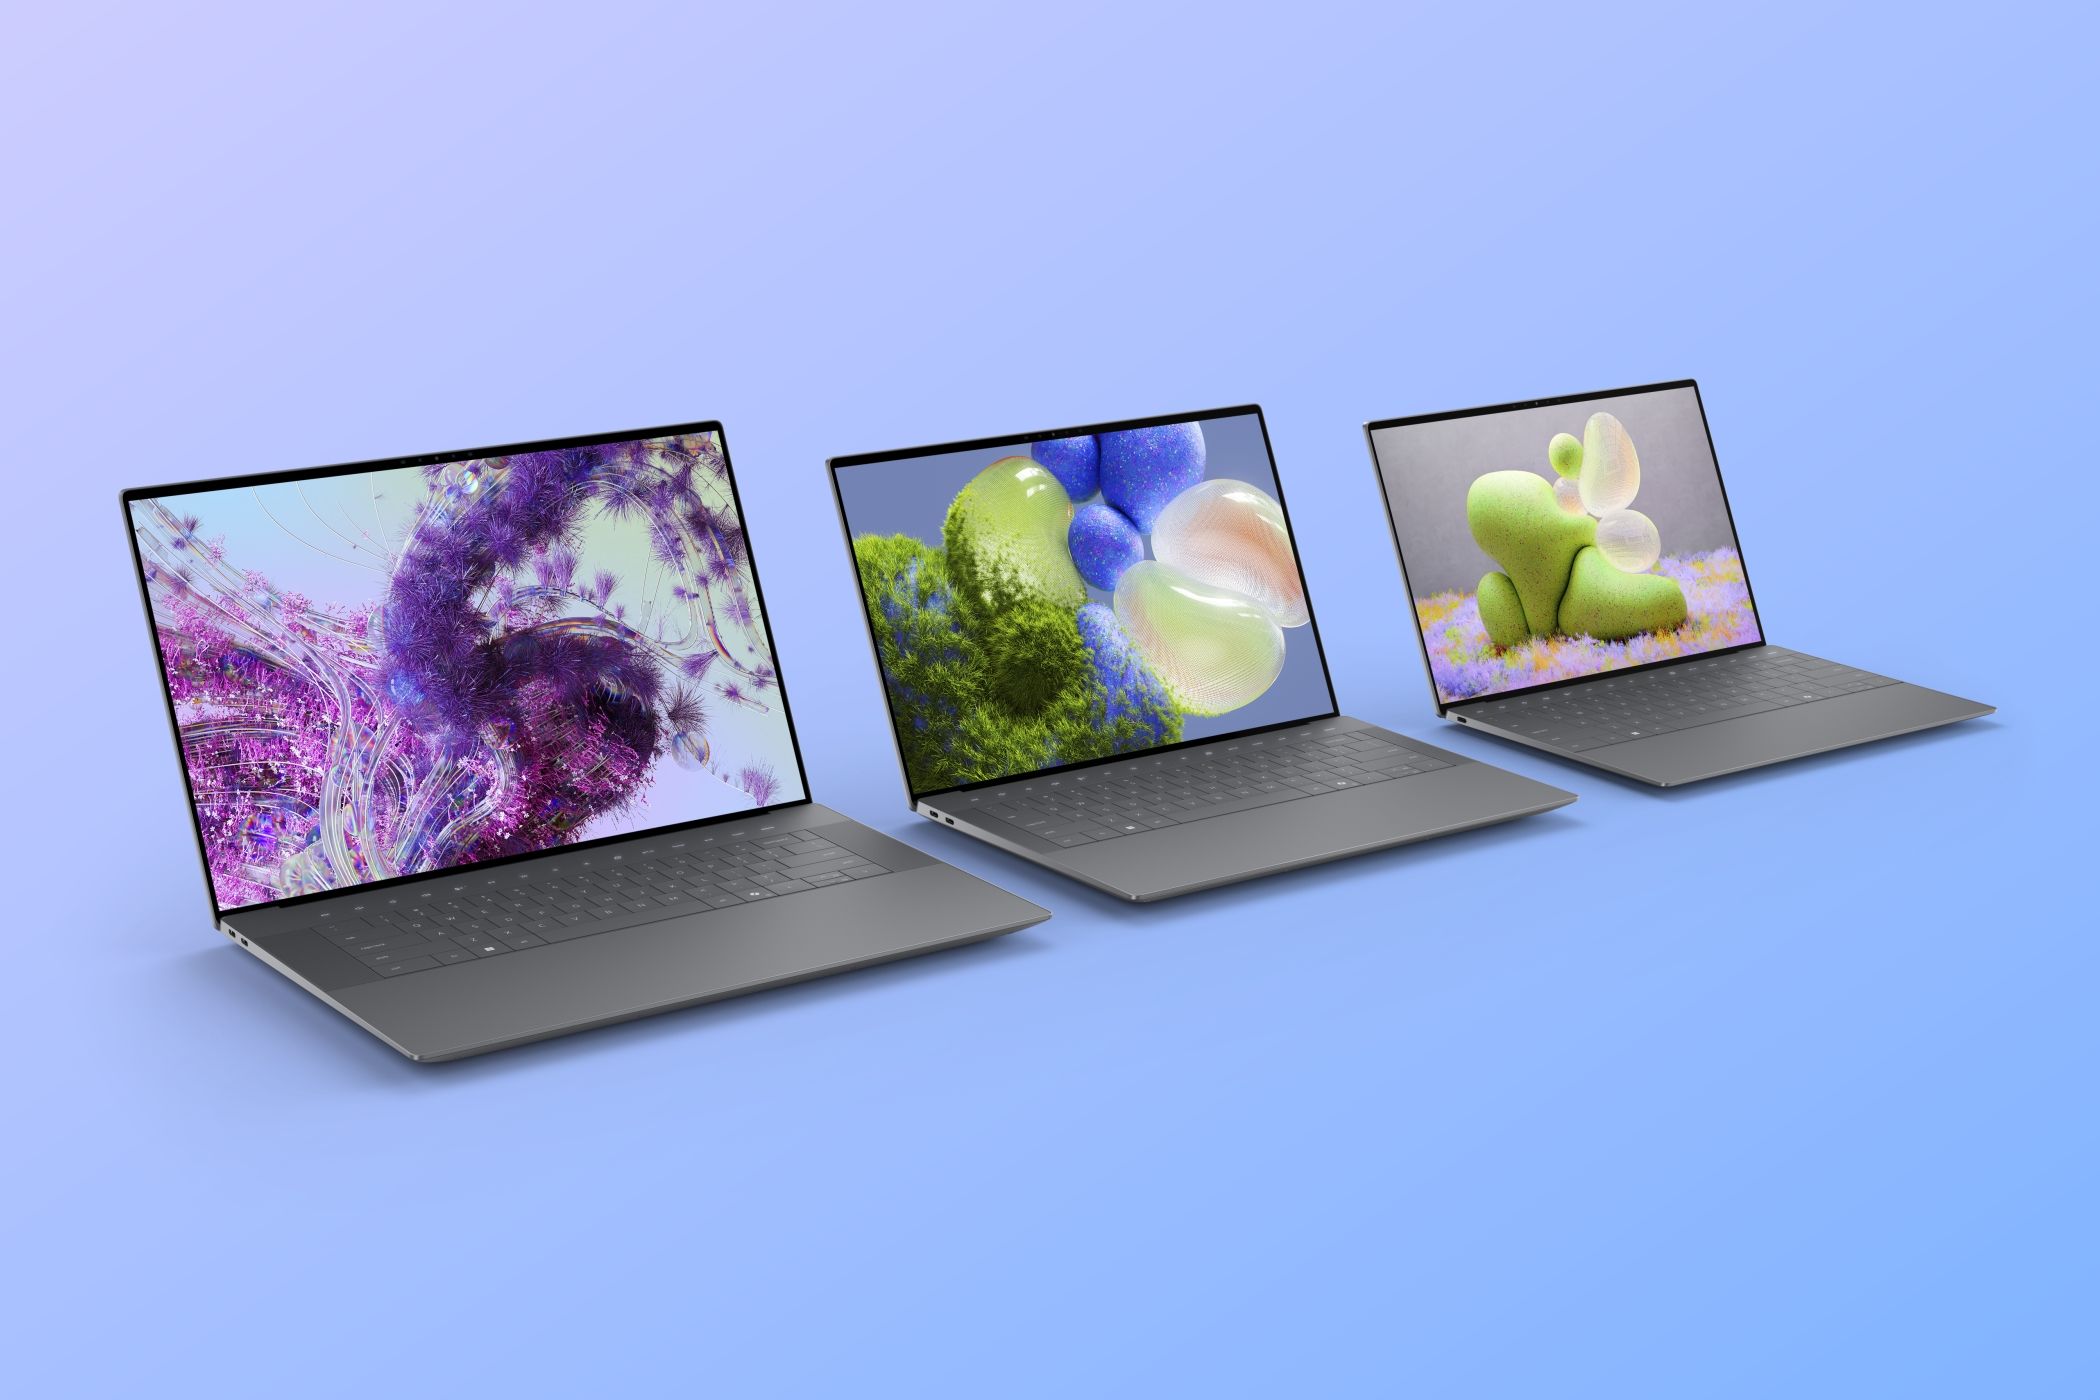 The Dell XPS family in Graphite over a blue gradient background